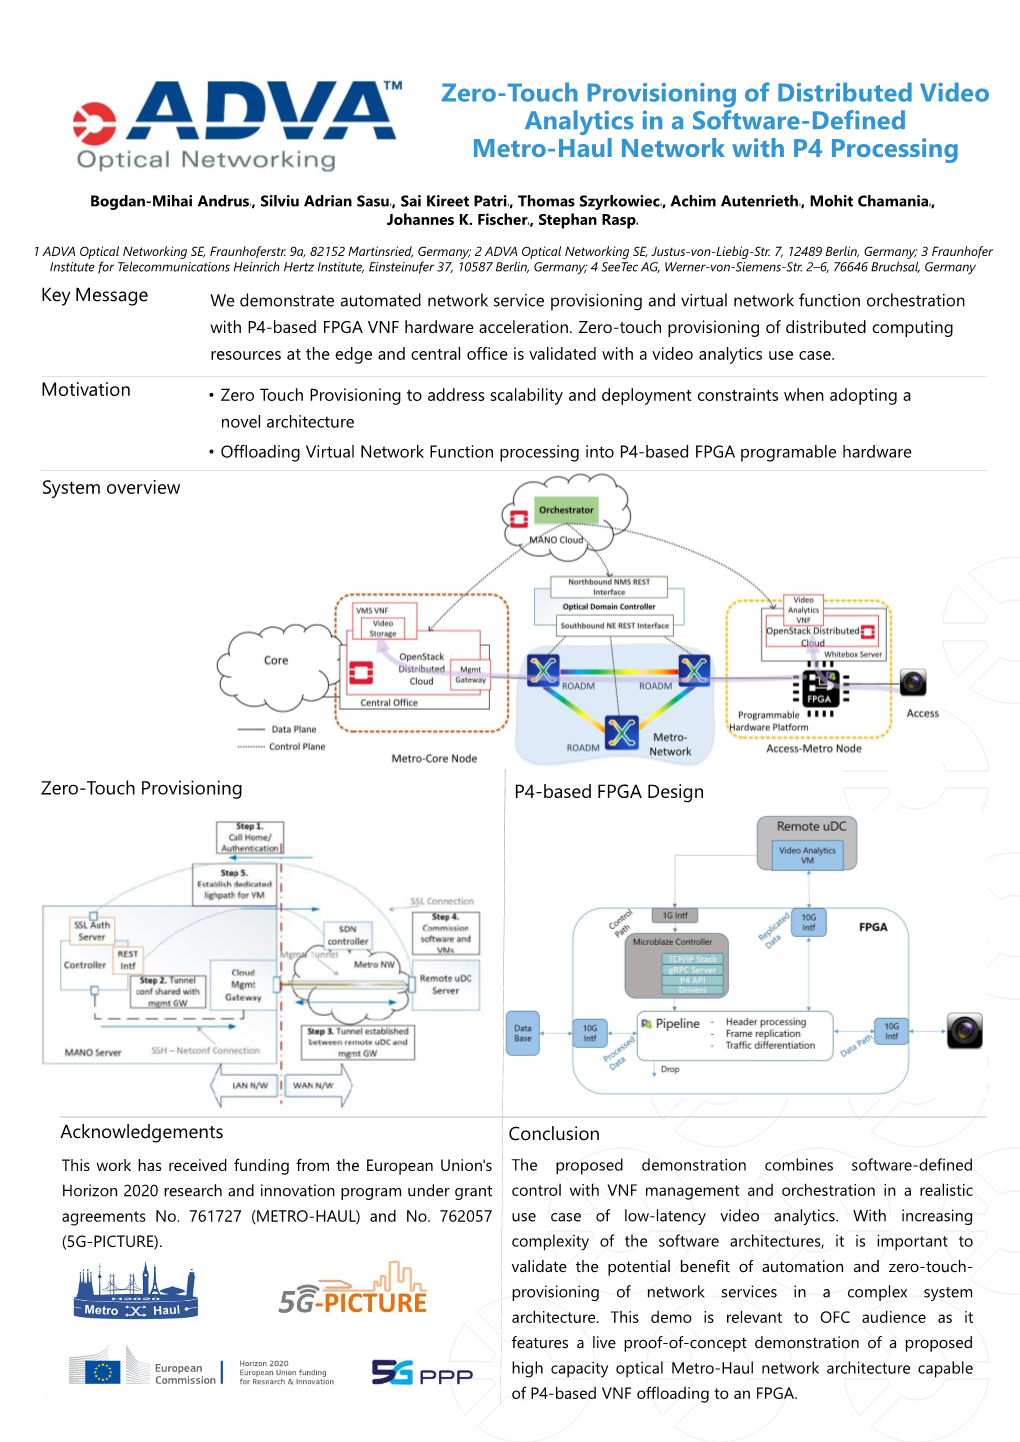 Zero-Touch Provisioning of Distributed Video Analytics in a Software-Defined Metro-Haul Network with P4 Processing